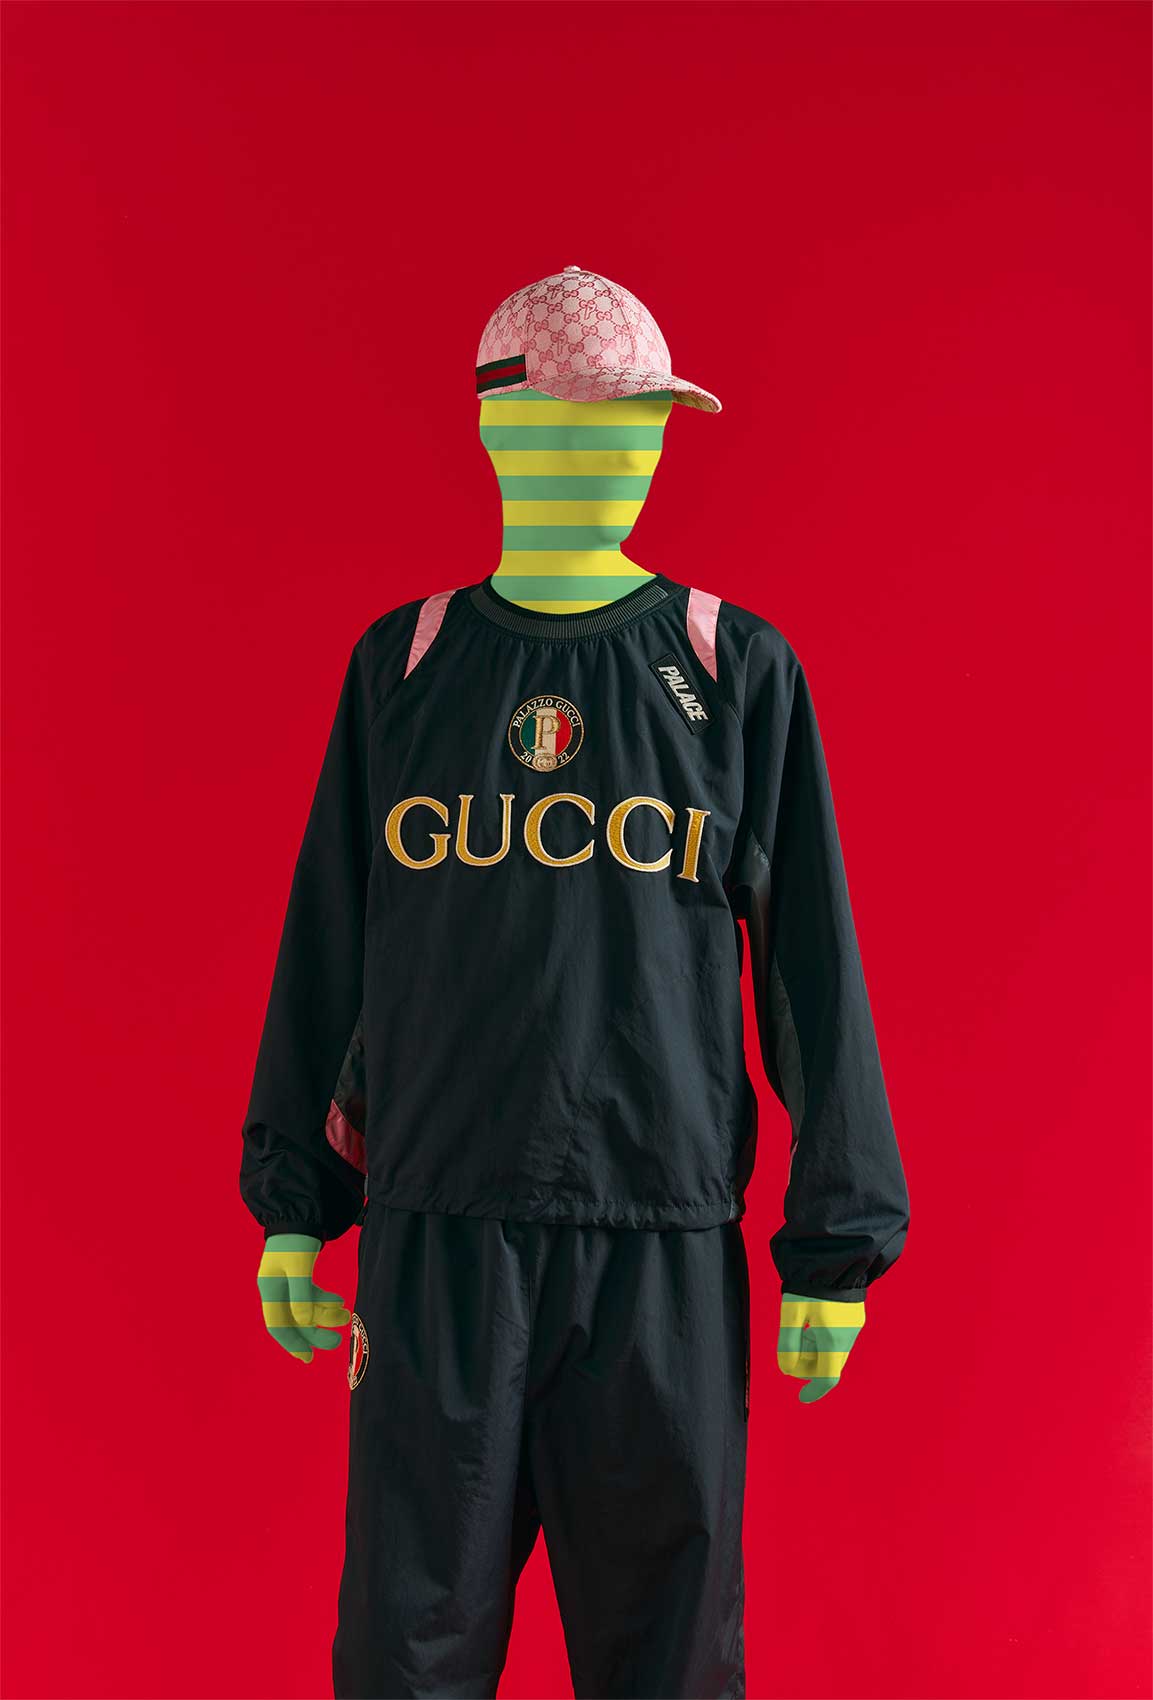 palace-skateboards-gucci-collab-release-date- (7)